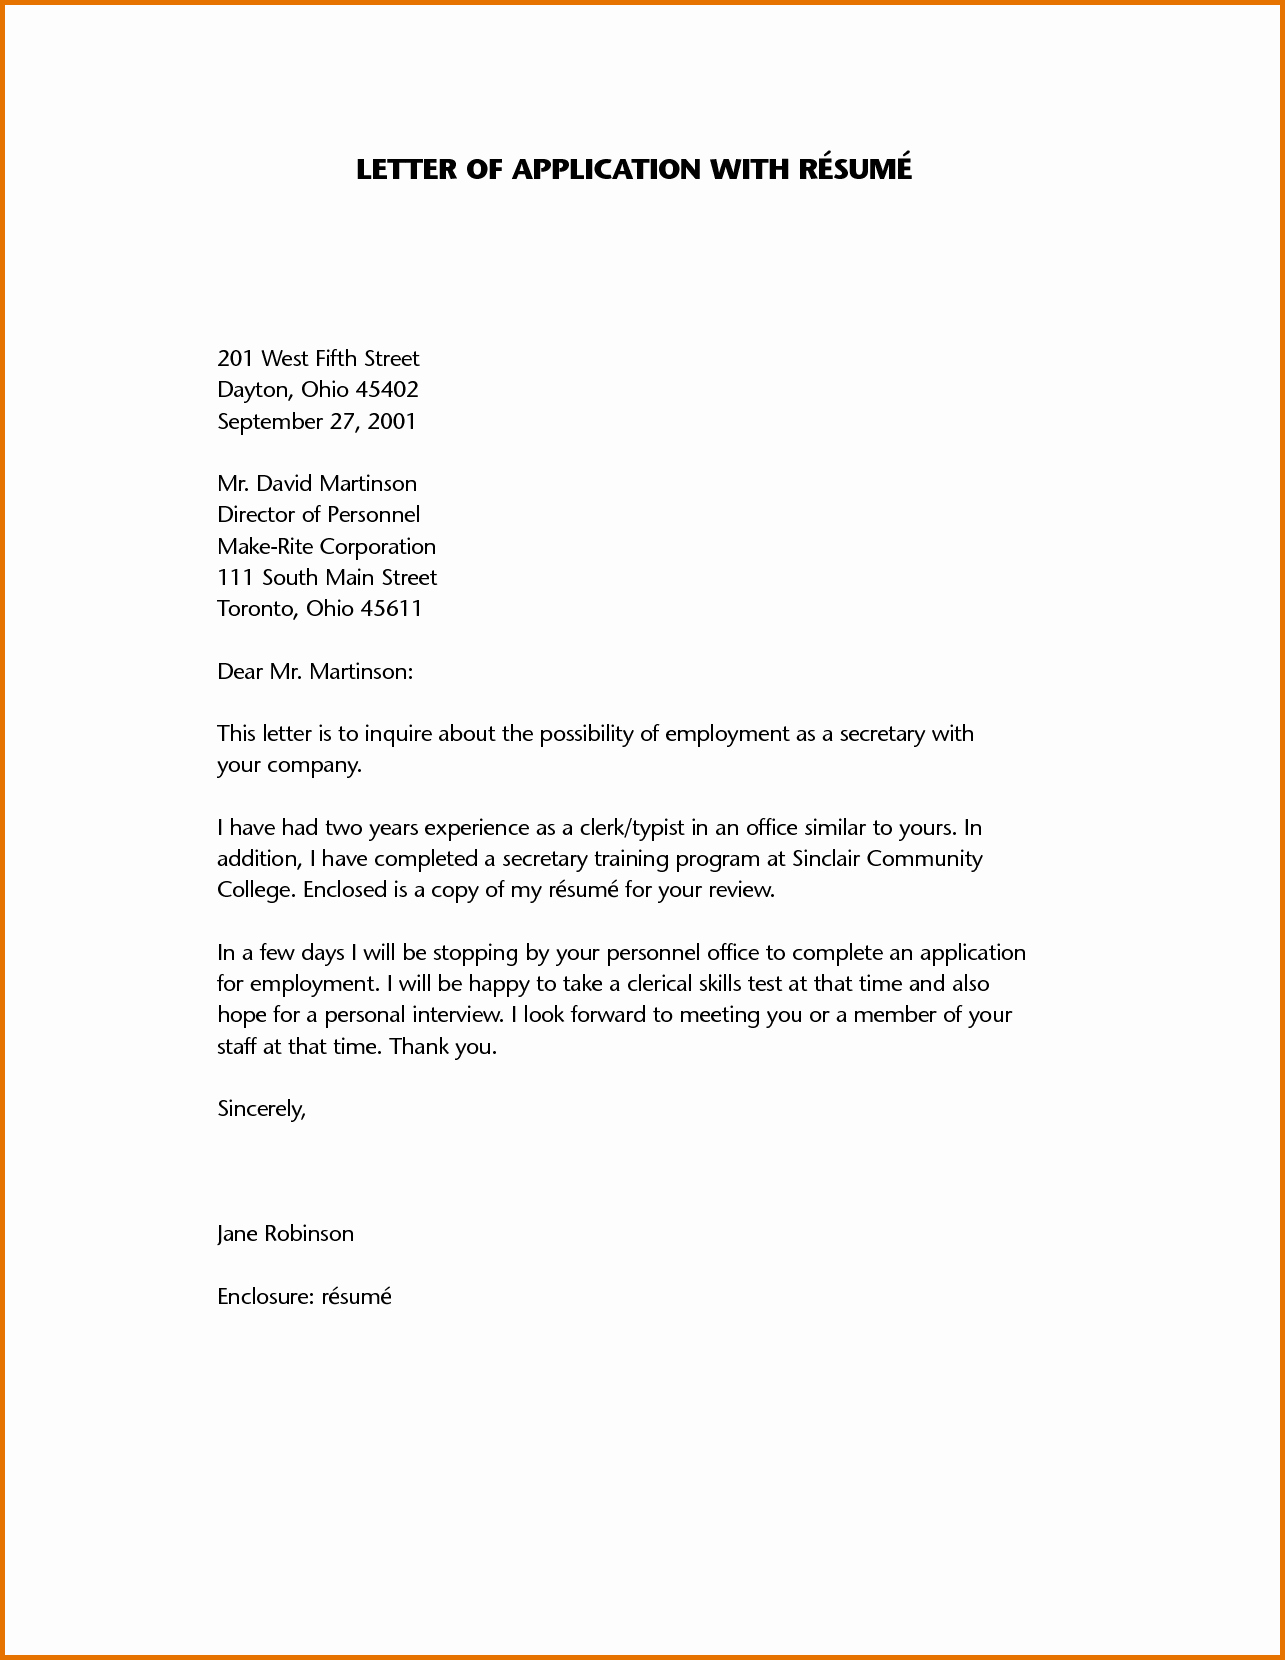 Resume for Letter Of Recommendation New Sample Of Application Letter and Resumereference Letters